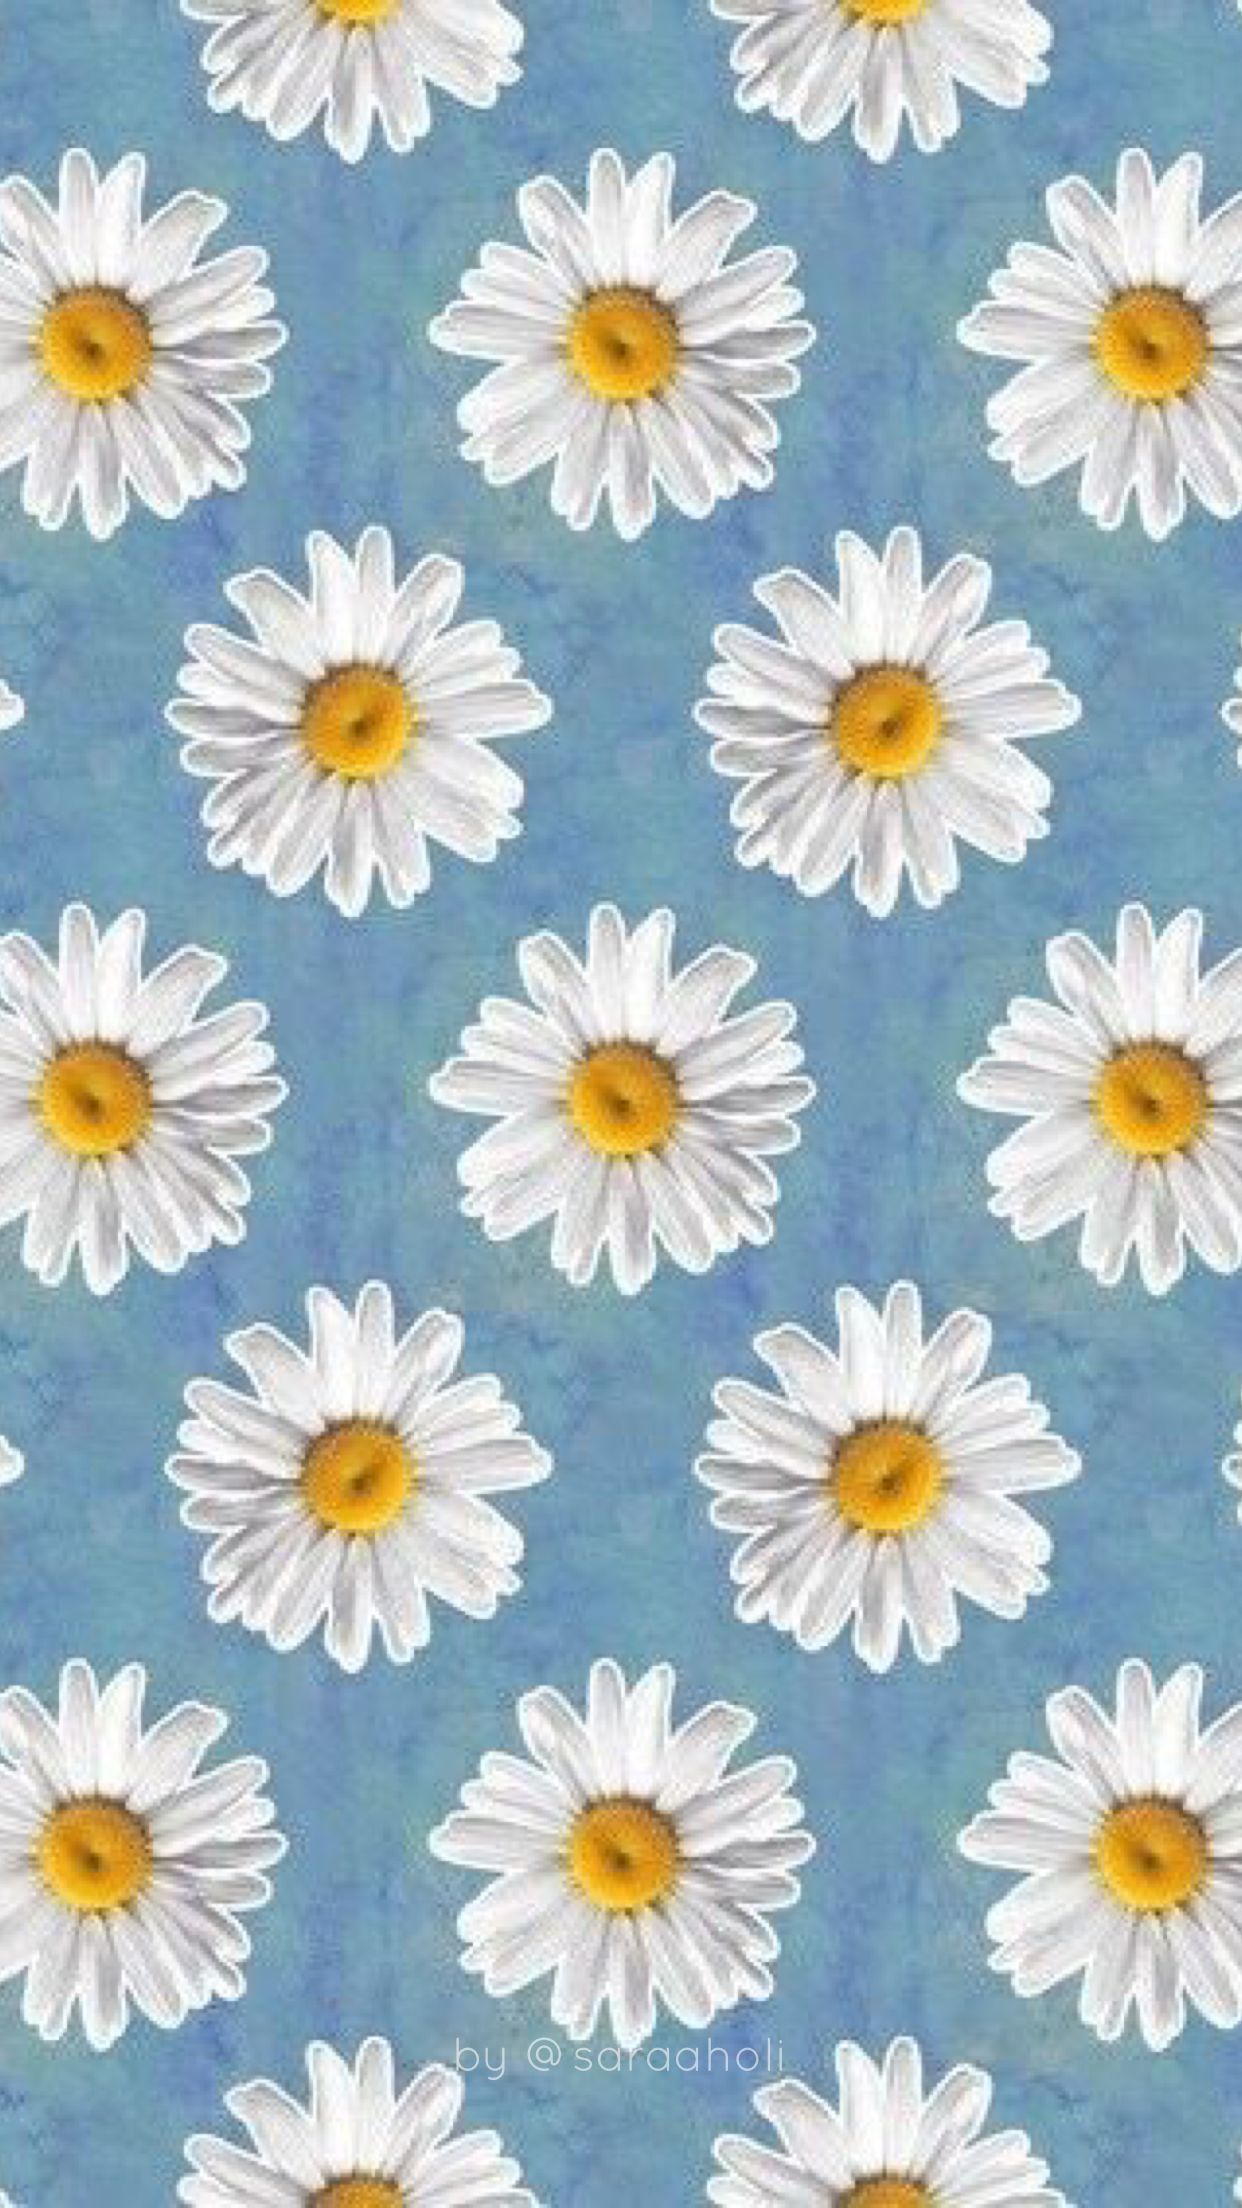 Daisy Phone Wallpapers